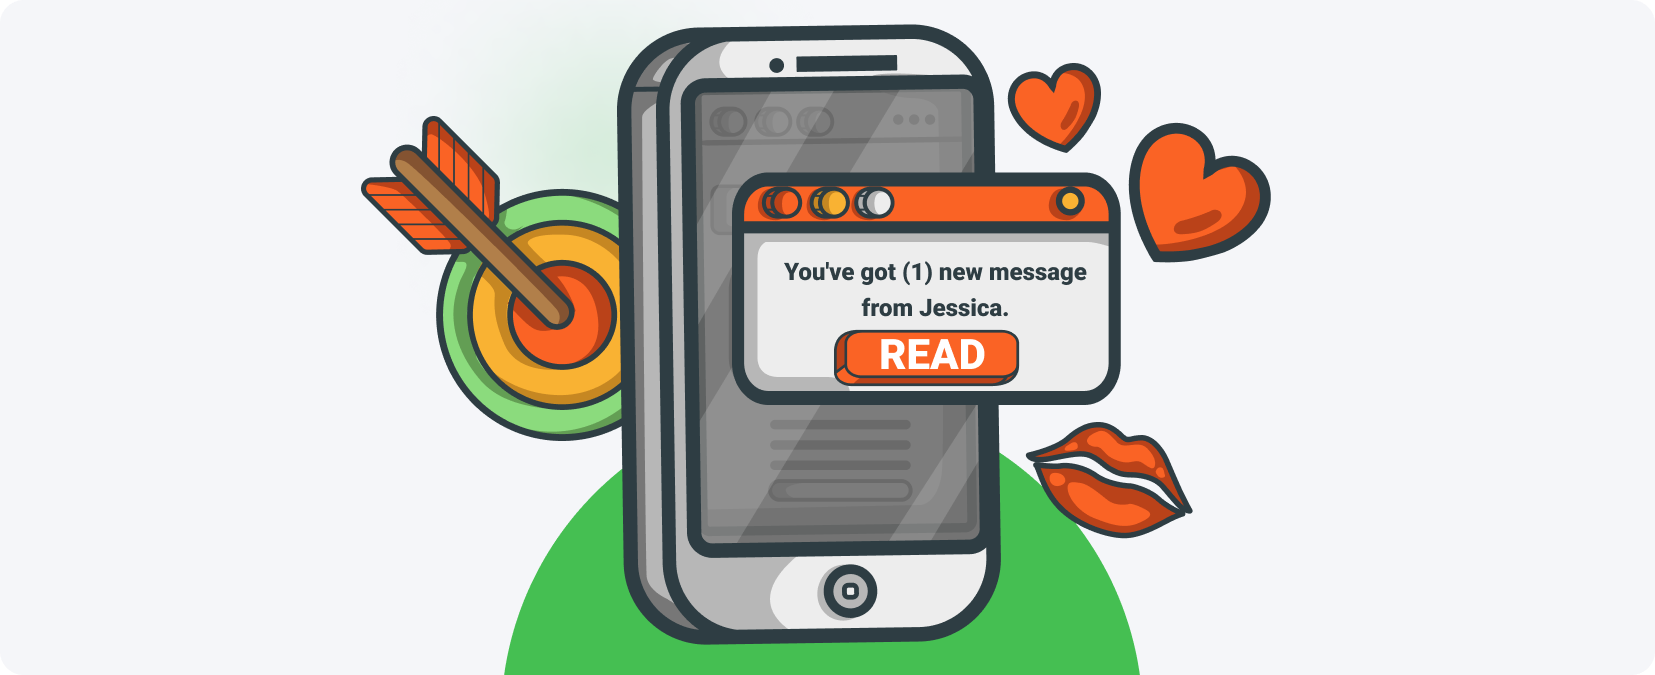 Example of push notifications in dating niche